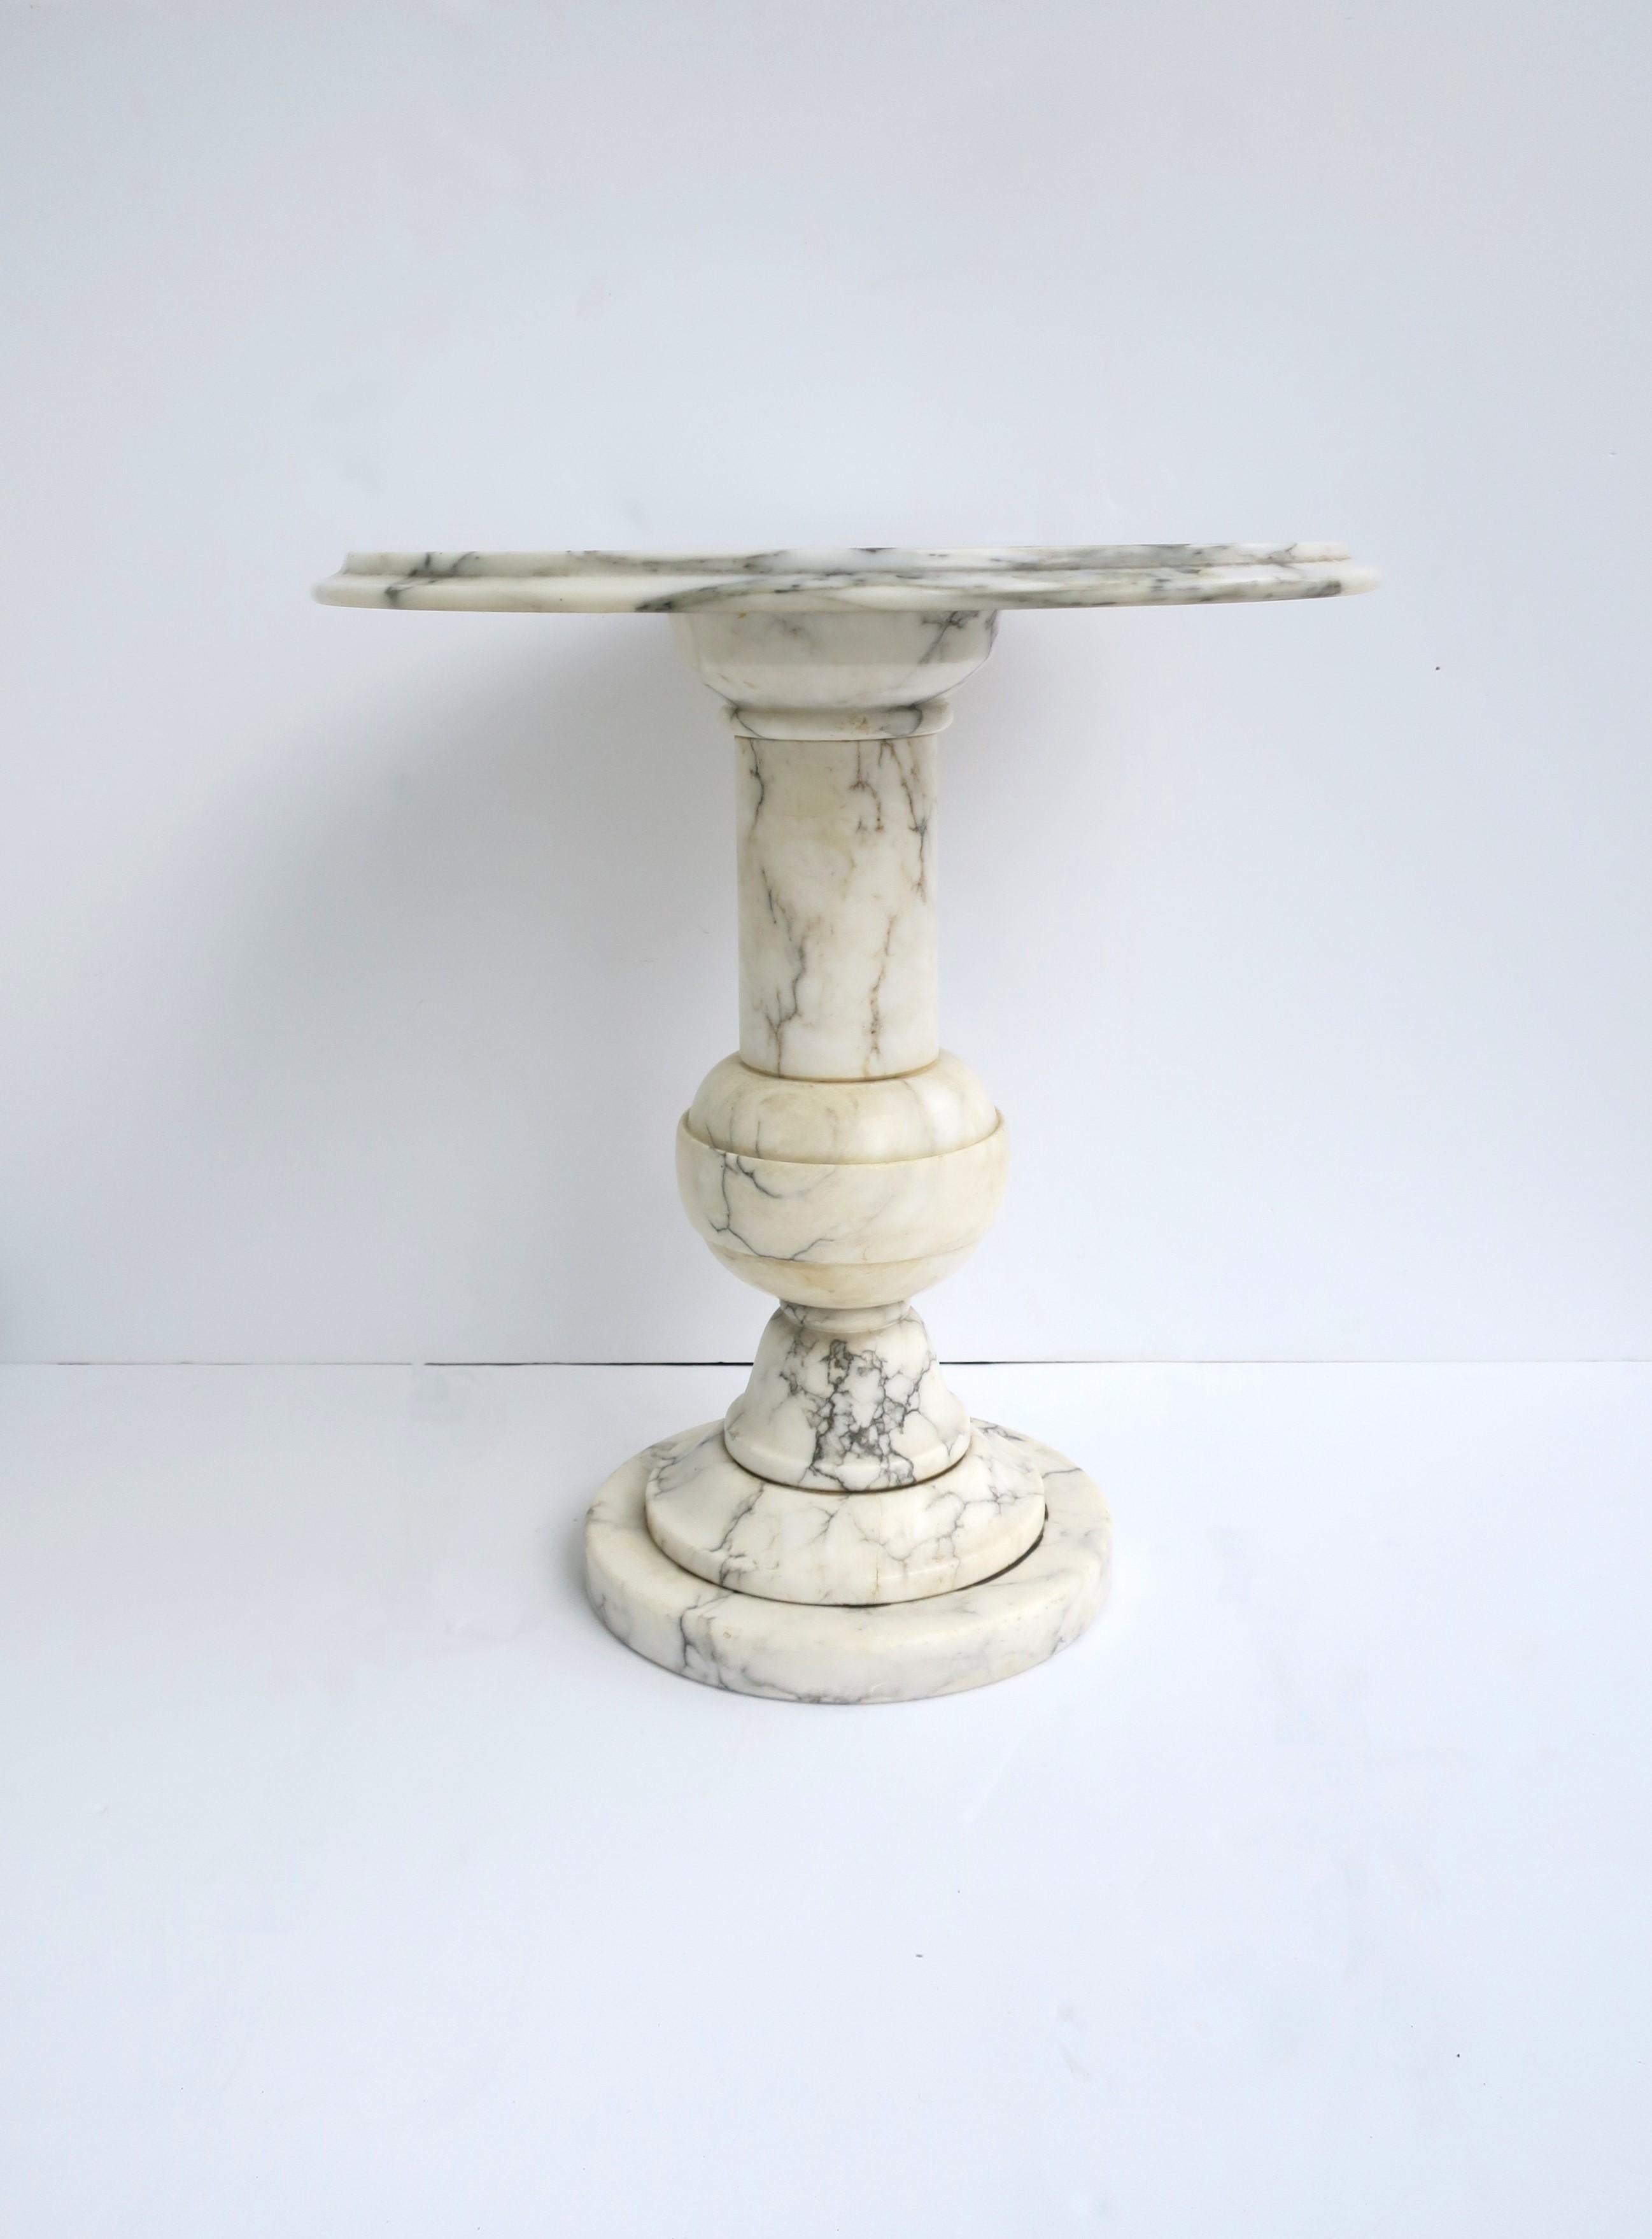 A substantial Italian round marble side or drinks table, circa mid-20th century, Italy. Marble is predominantly white with black and grey veining. A great table for drinks, cocktails, etc. Dimensions: 18